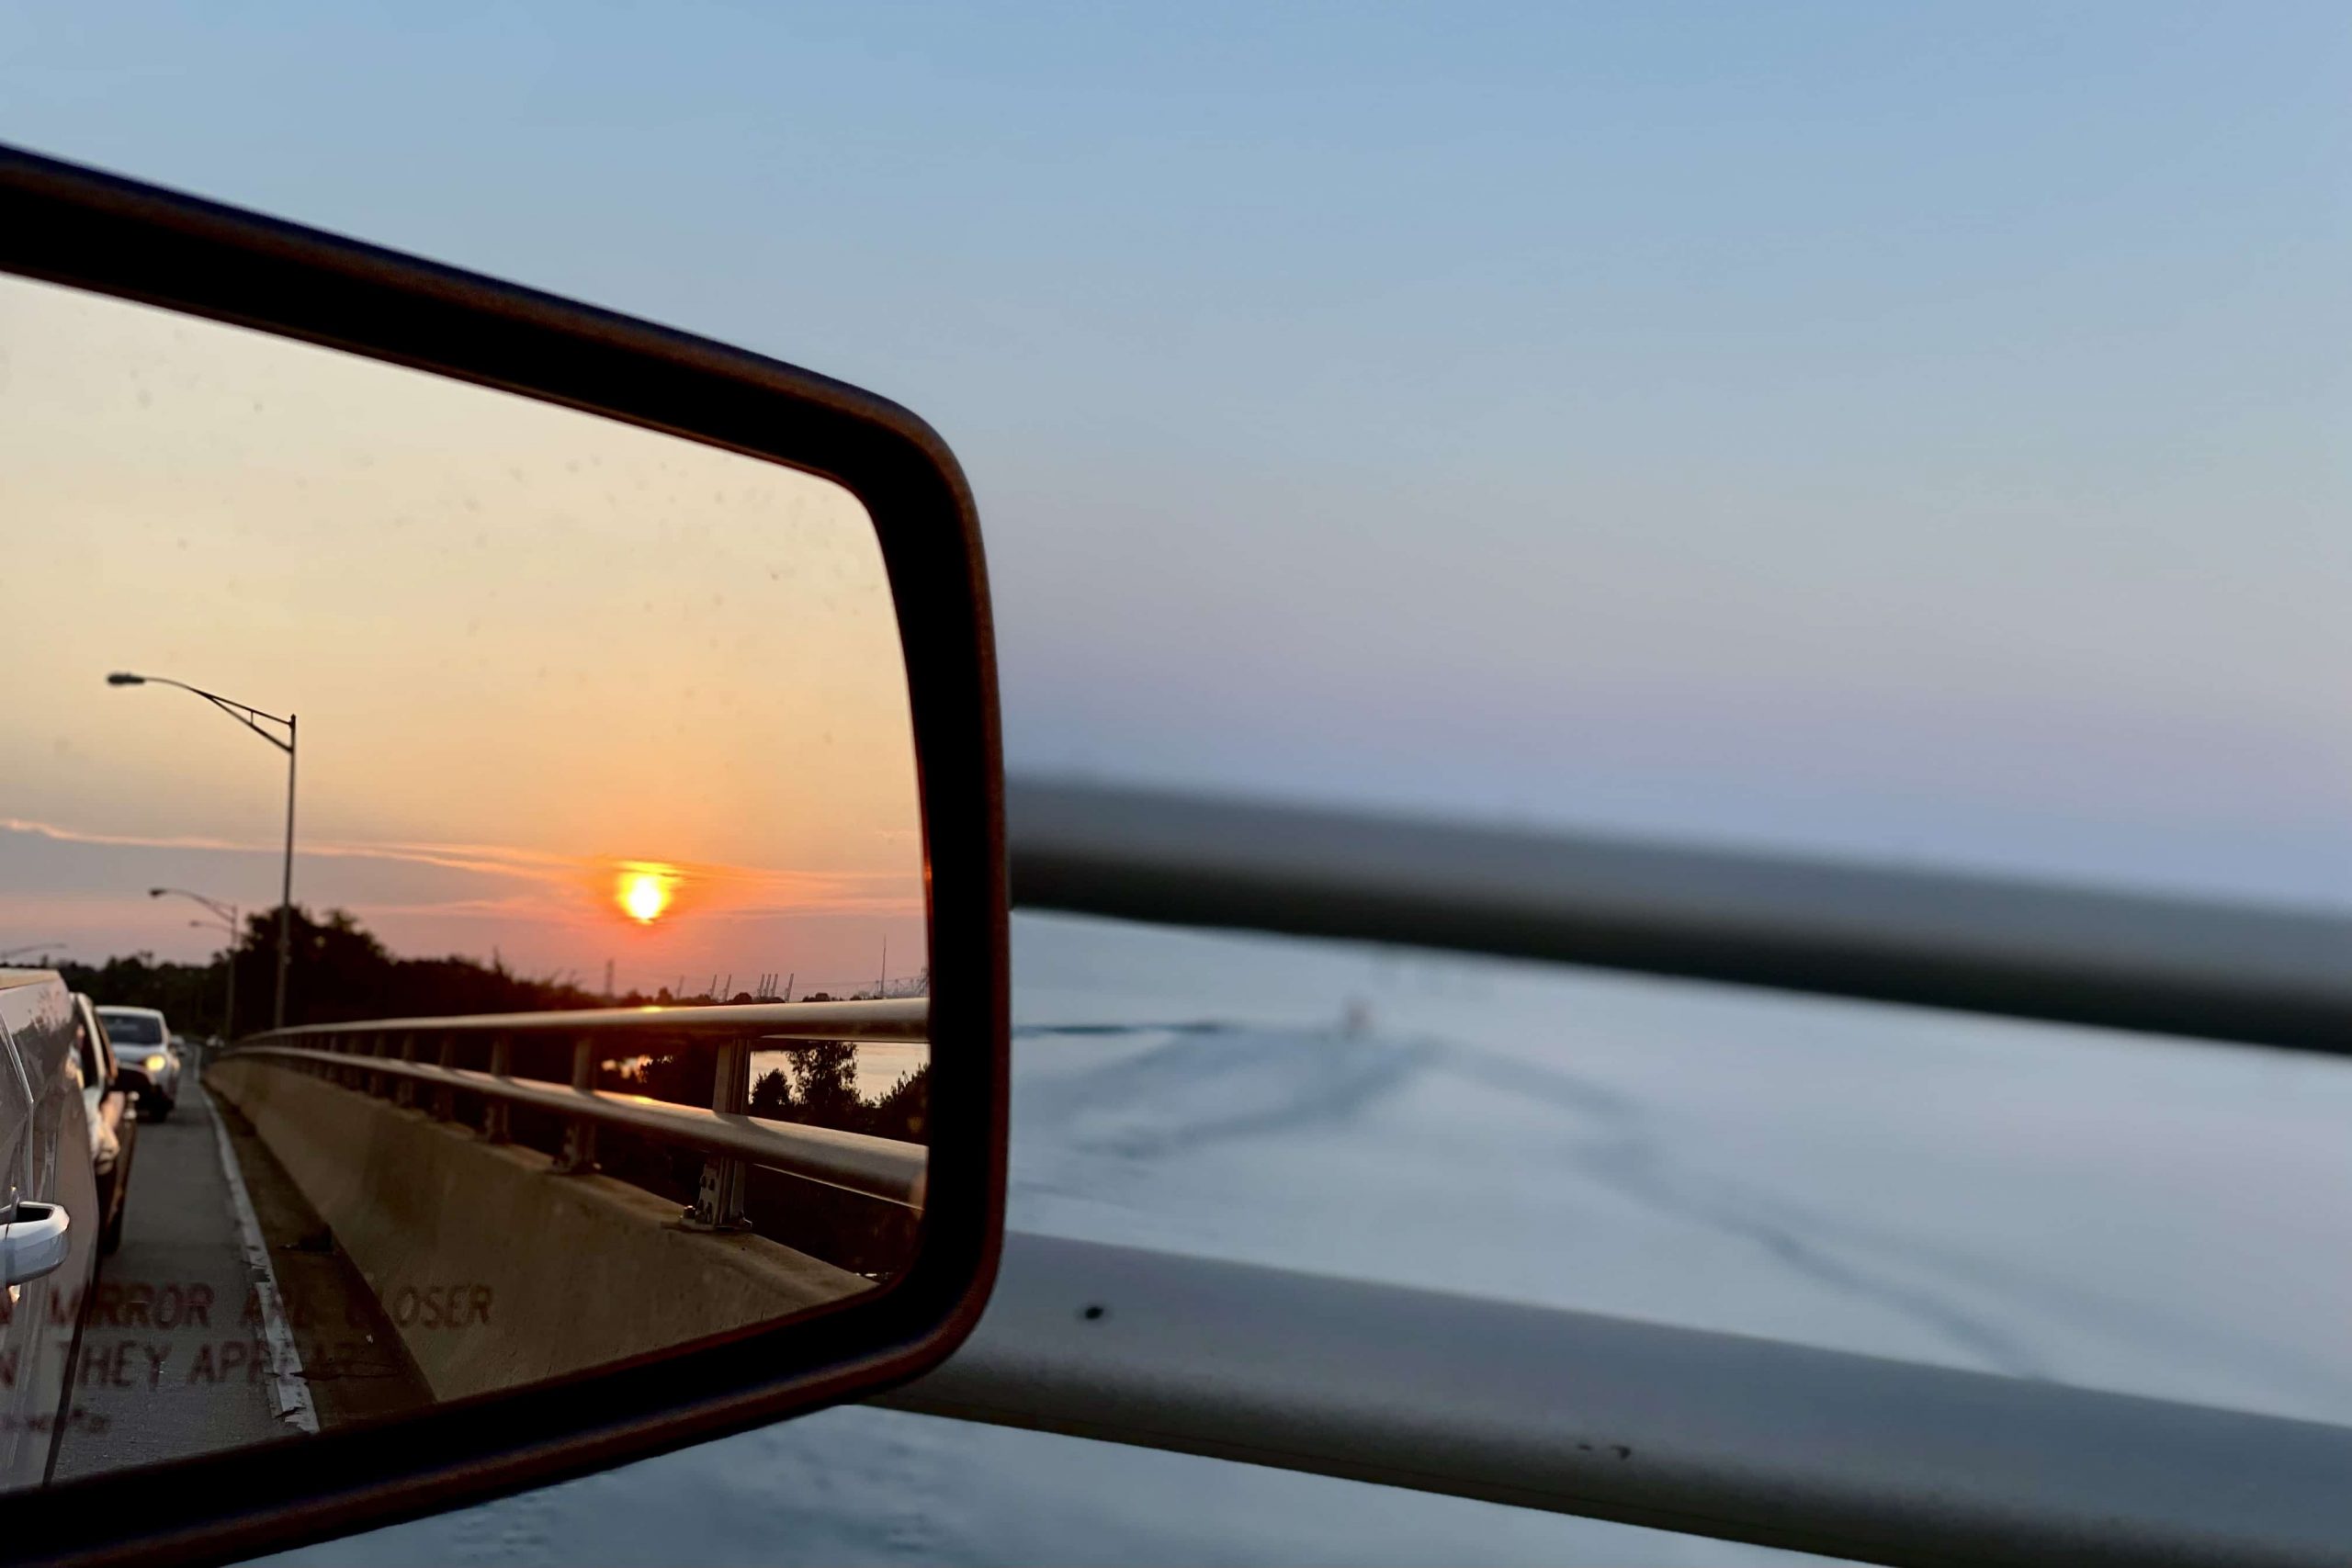 mirror on a car showing the reflection of a sunset